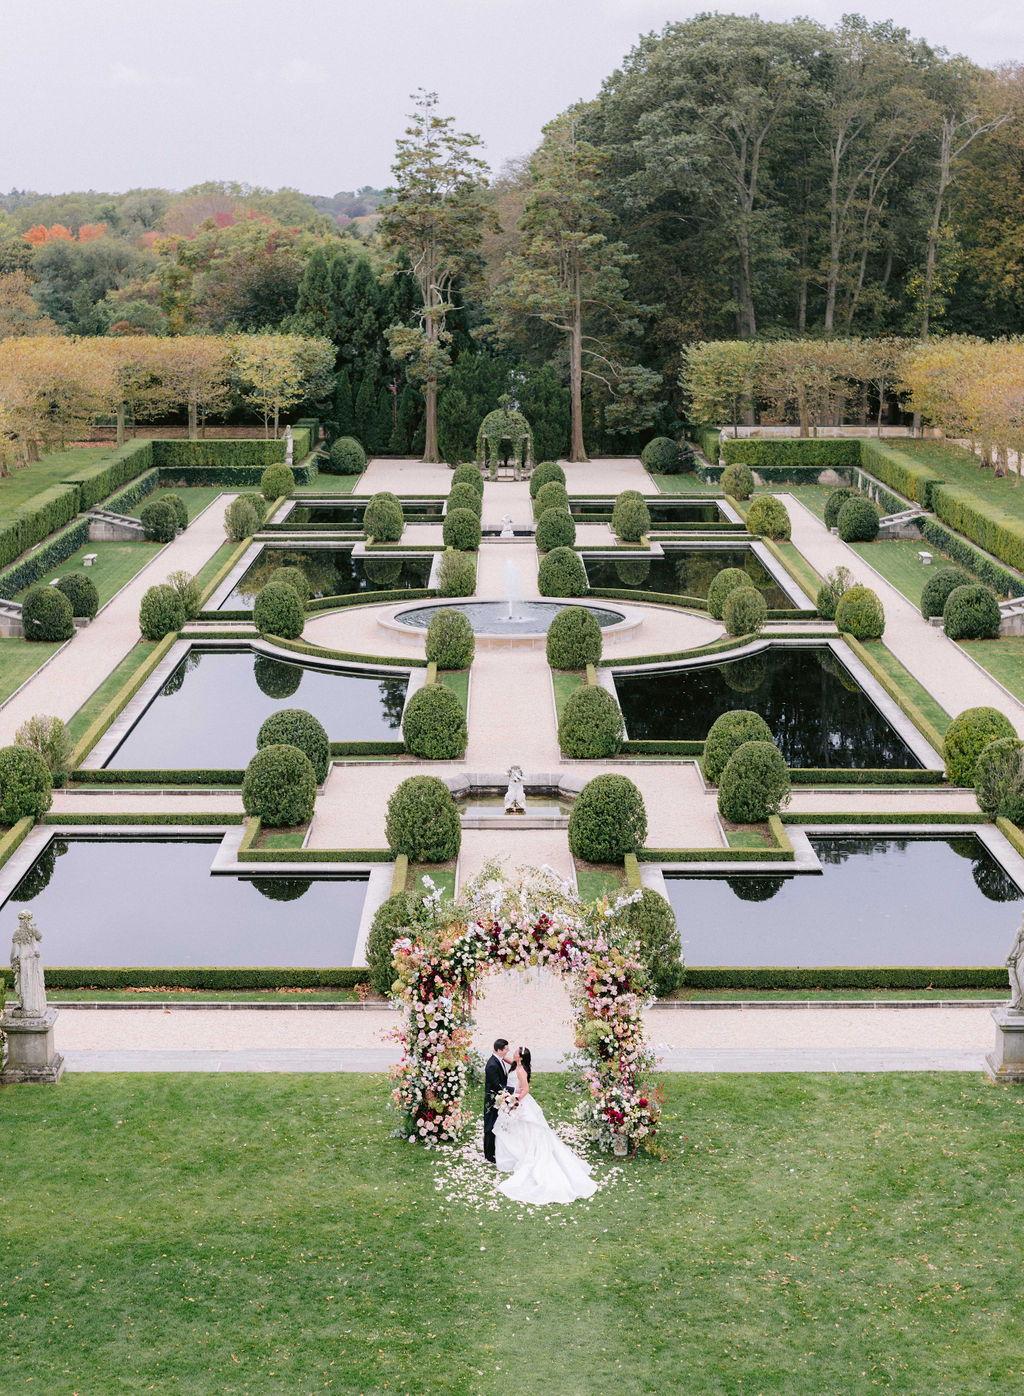 Bride and groom at Oheka Castle Wedding in French gardens US luxury wedding venue